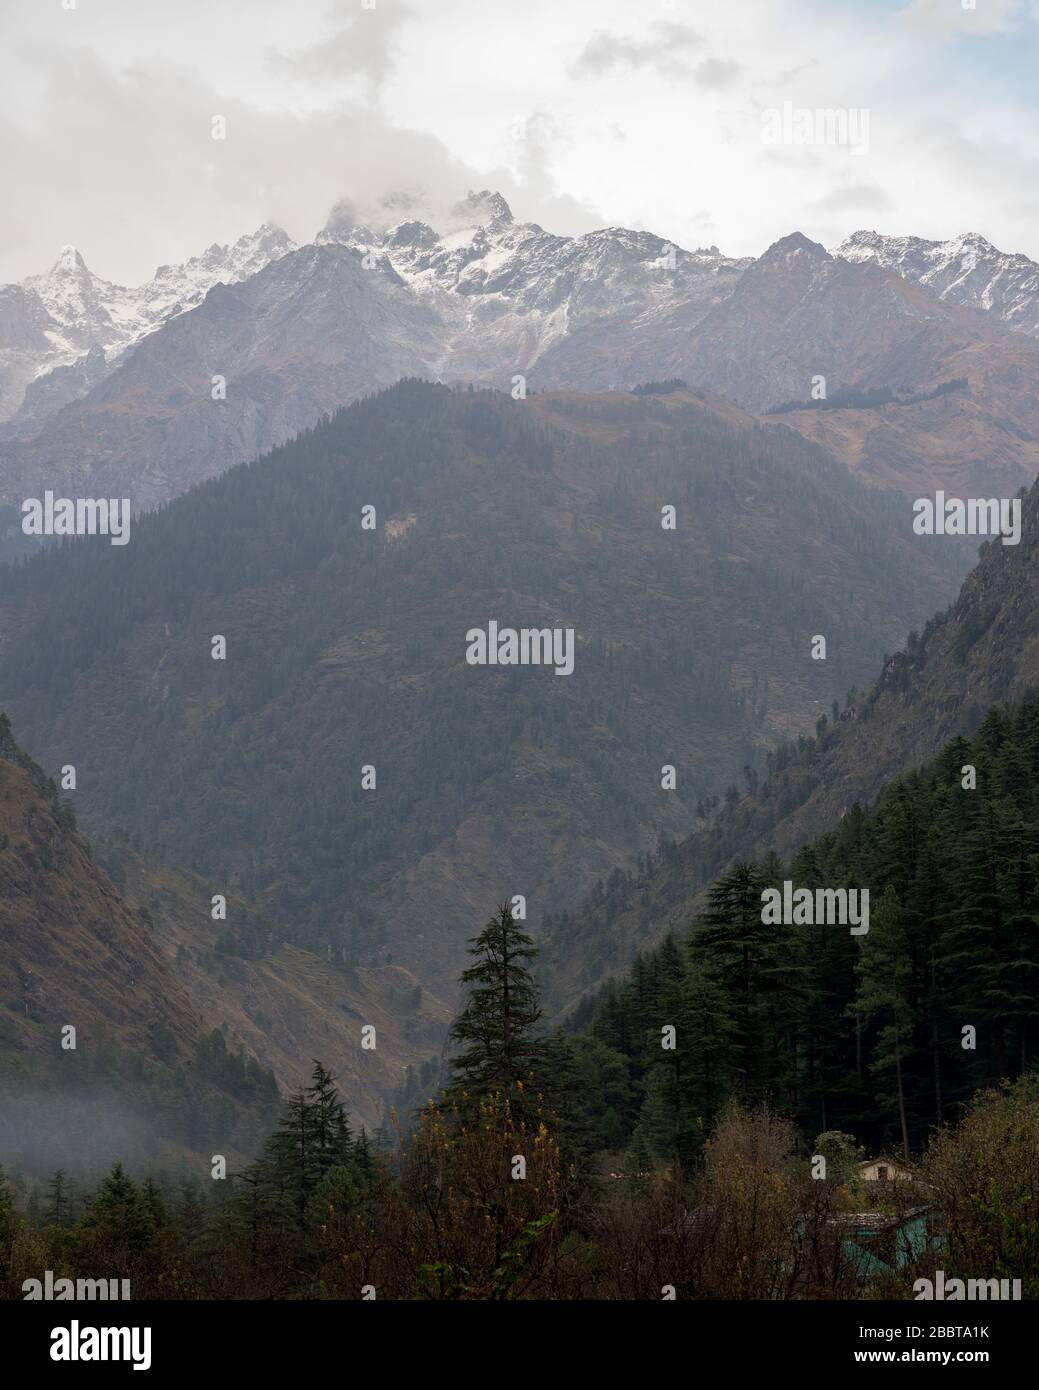 Manali city view in Northern India Himalayas landscape Stock Photo